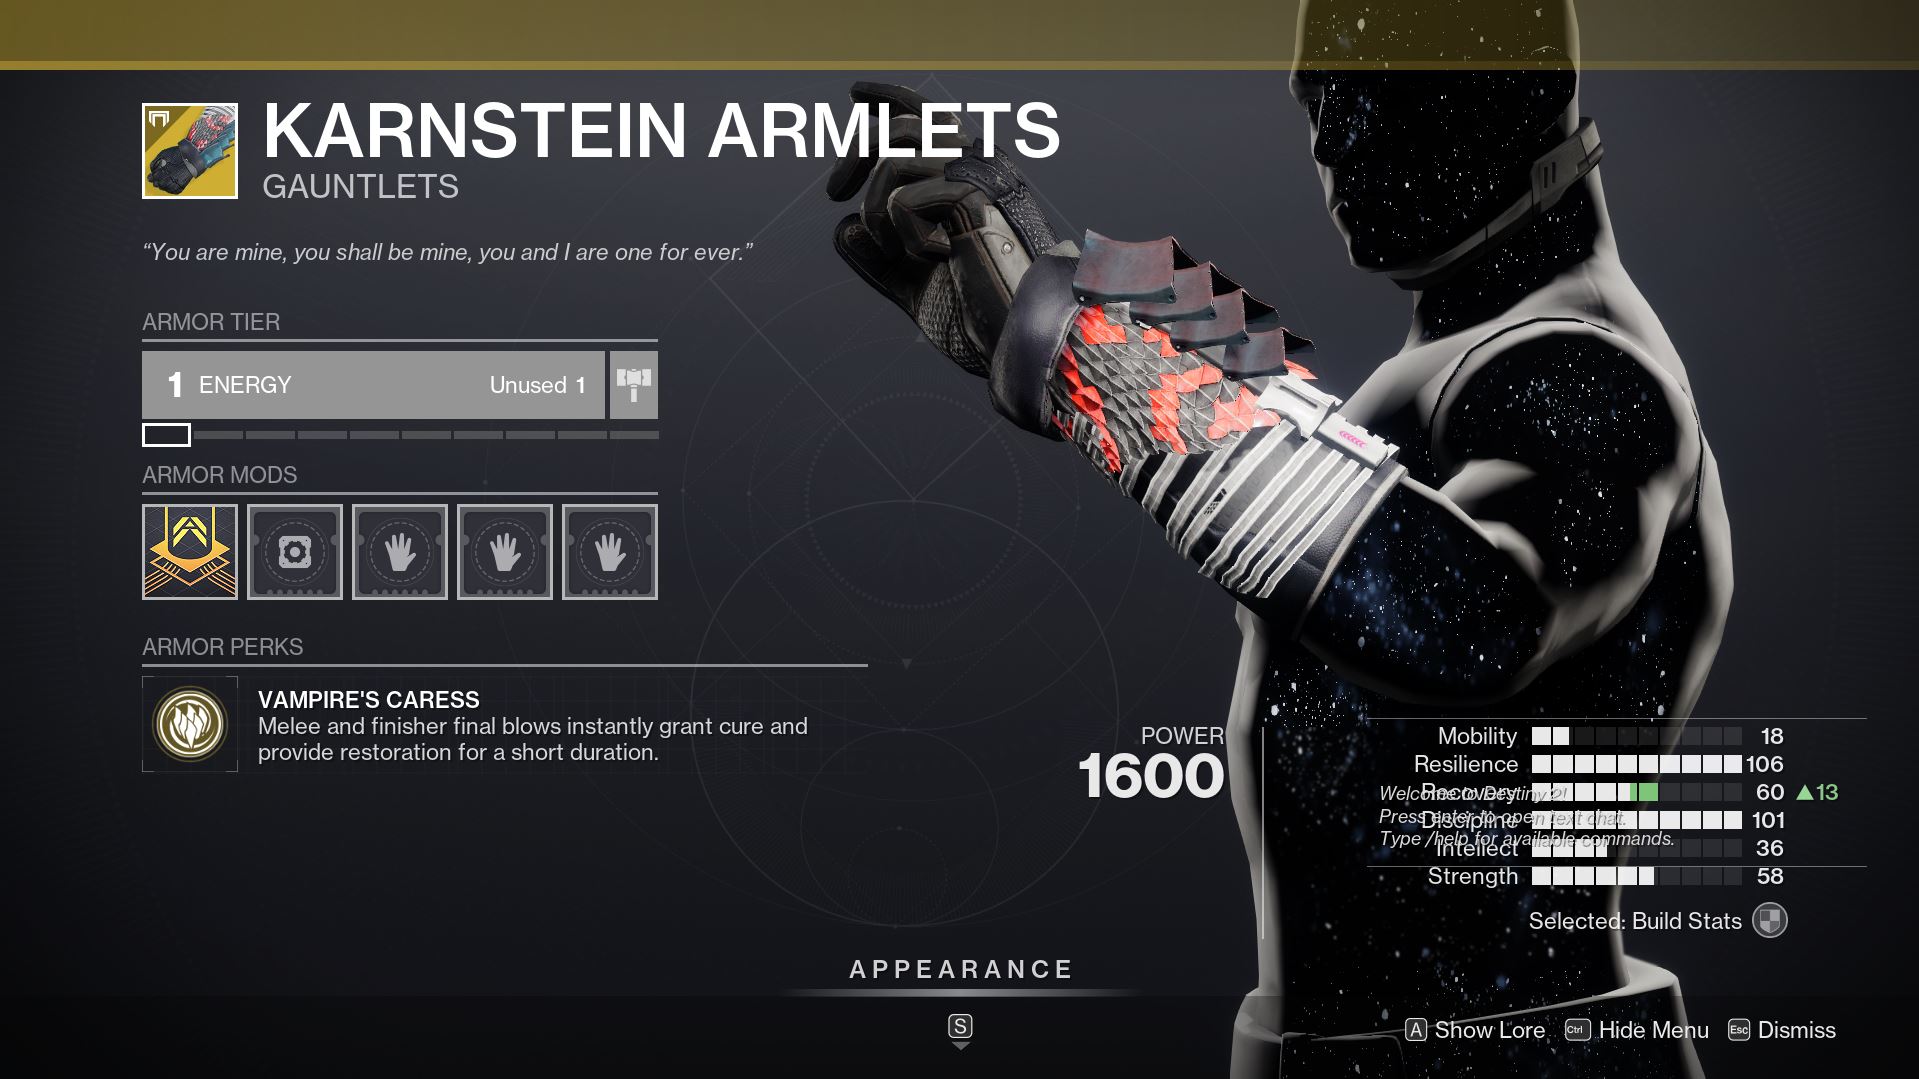 Destiny 2 Karnstein Armlets Destiny 2 Has Seemingly Leaked New Exotic Armor Changes In-Game